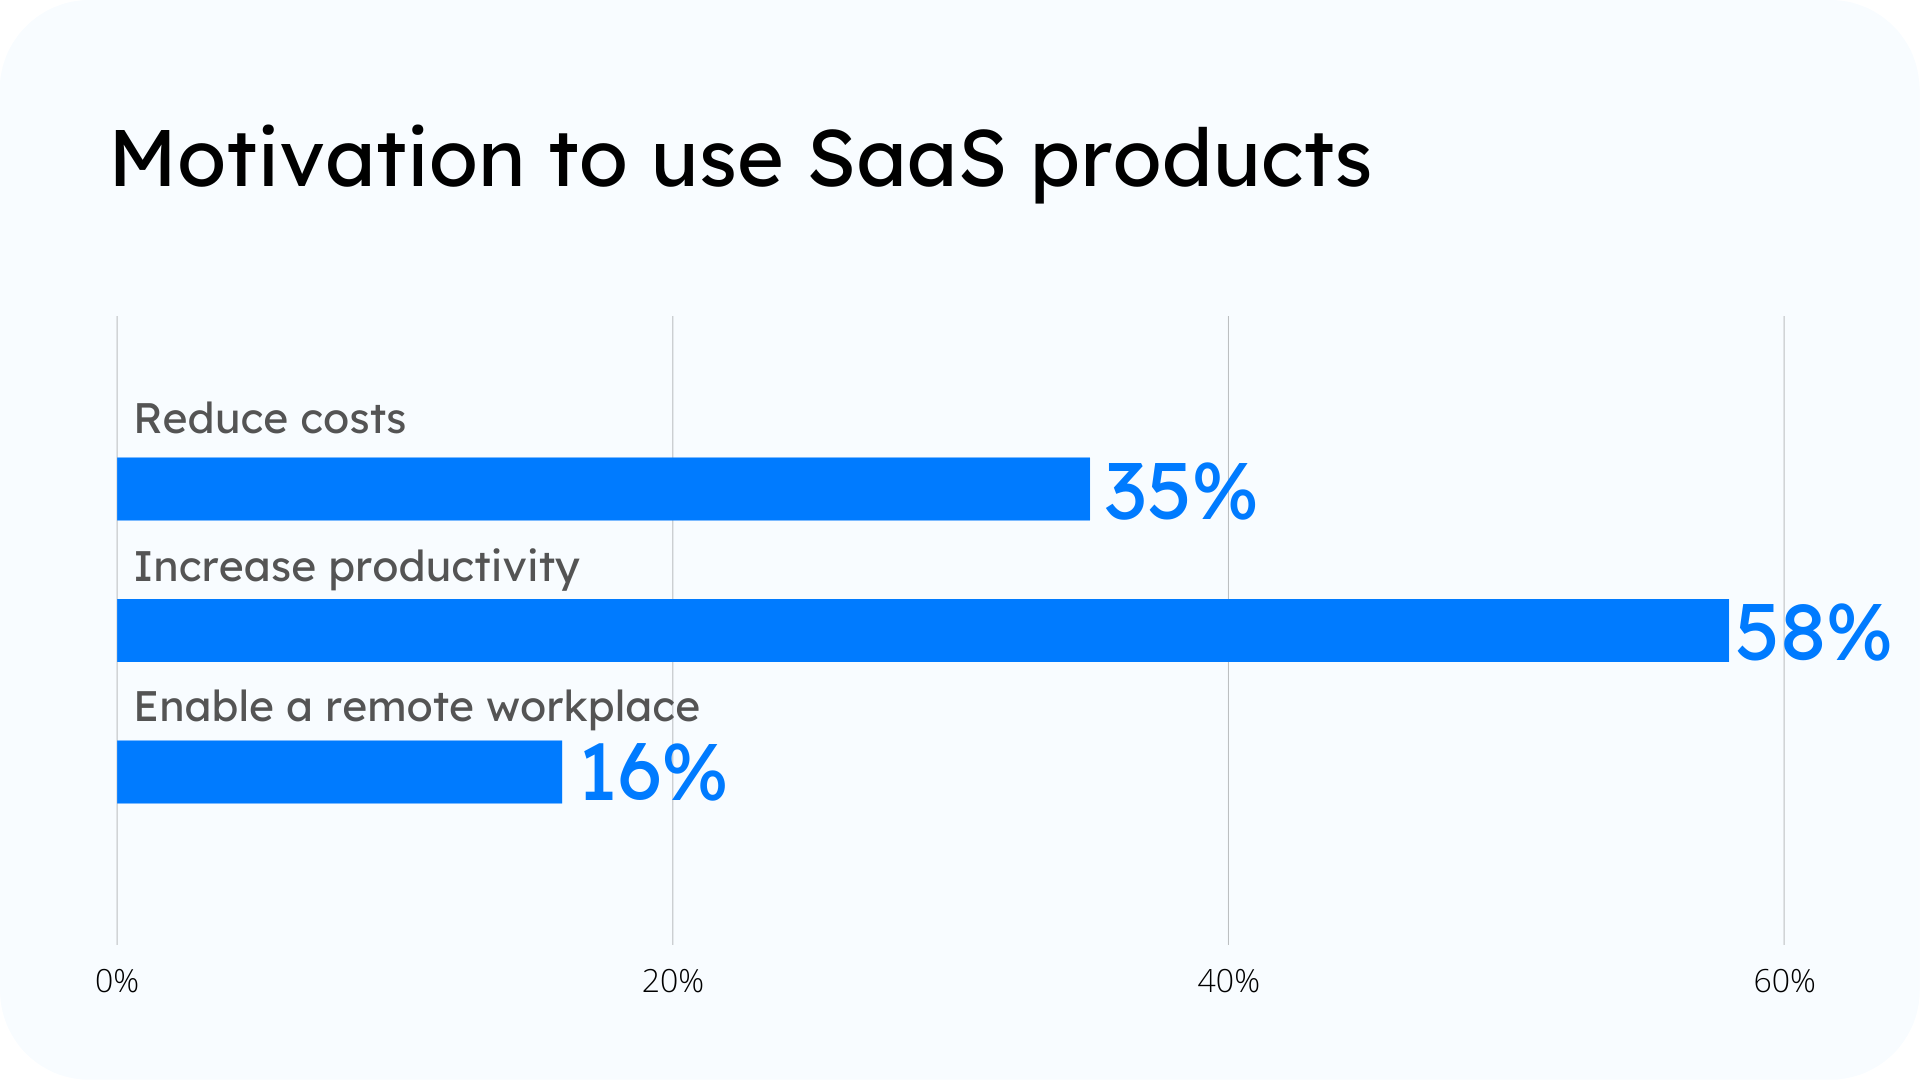 Statistics - Why people want to use SaaS products